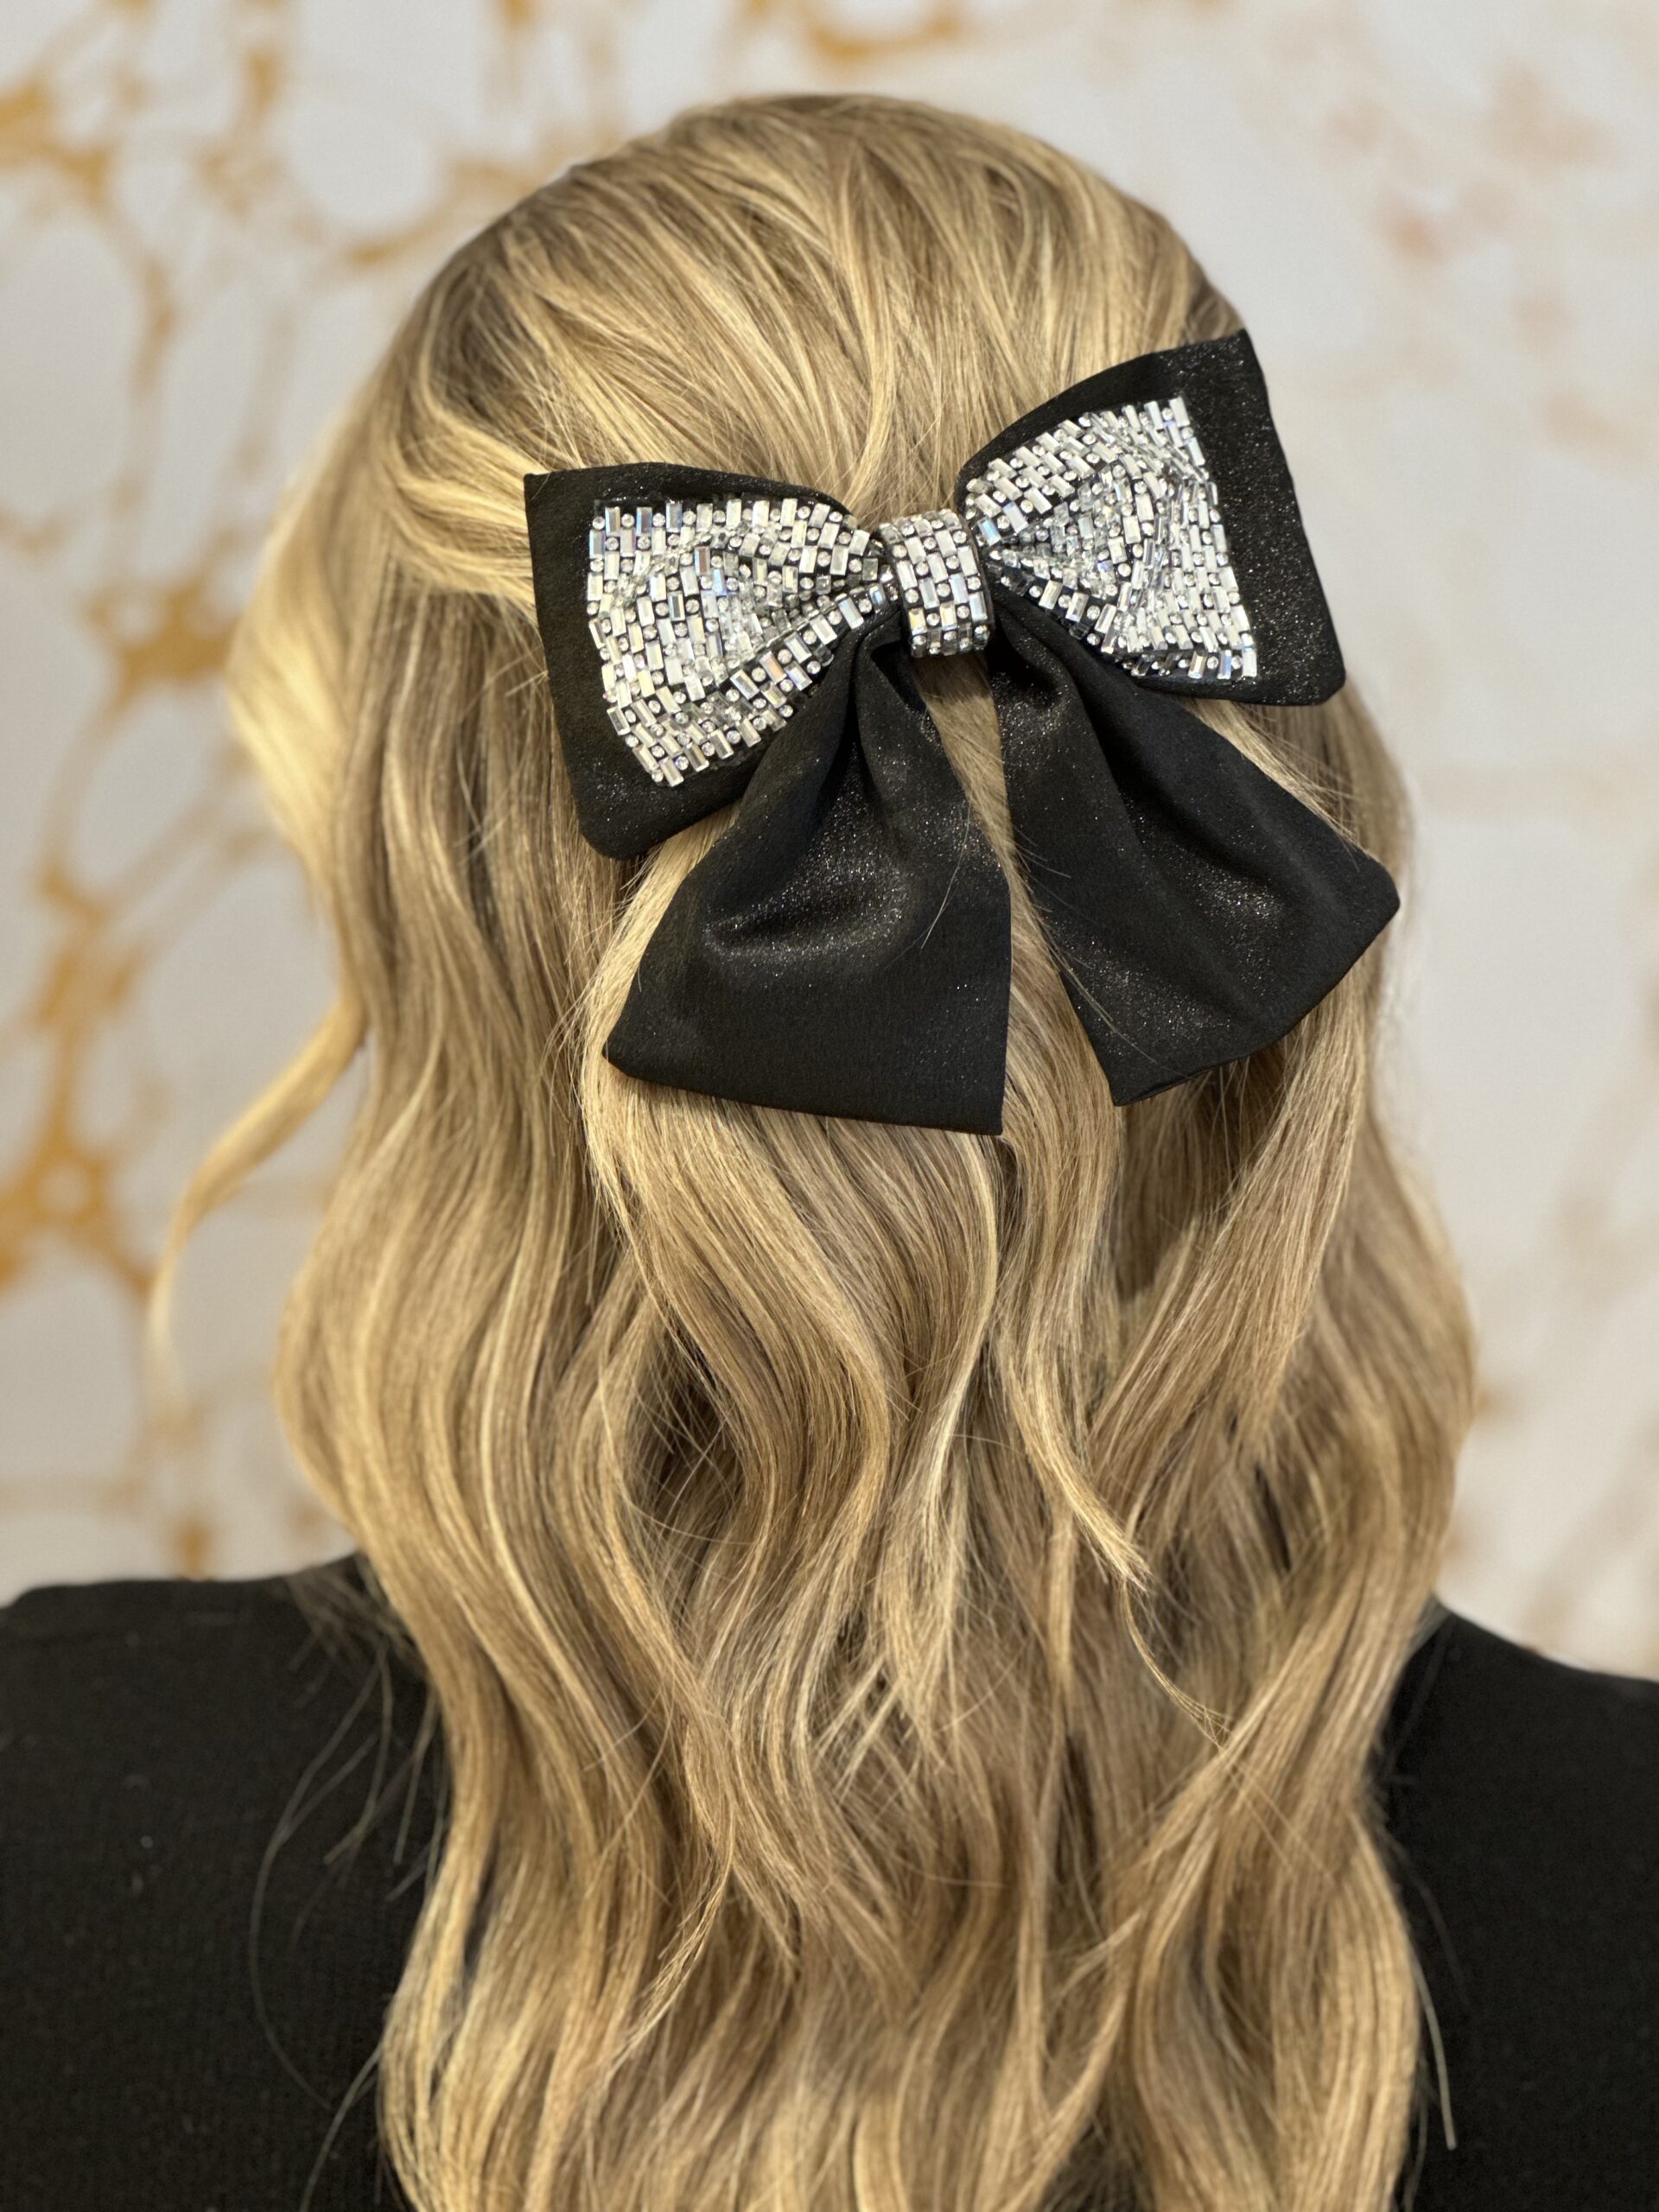 A photo showing the back of a blonde person's head, with a hair bow prominently displayed